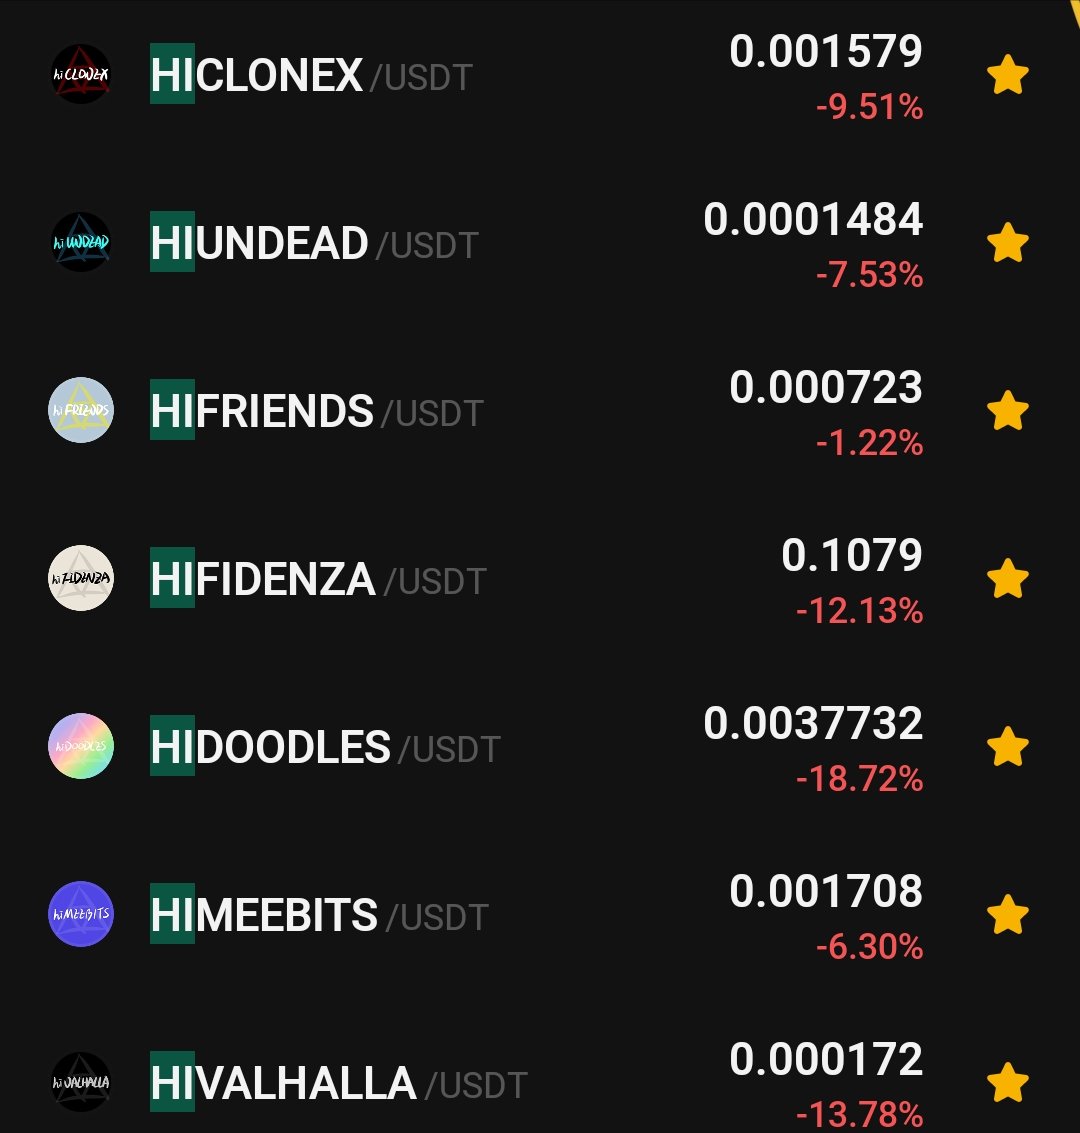 Buy the dip.👌 @FractonX @kucoincom #hiNFTS #BTC #NFTs @BoredApeYC #NFTCommunity #Crypto    #cryptocurrencies #NFTcollections #CryptoCommunity #100xGems